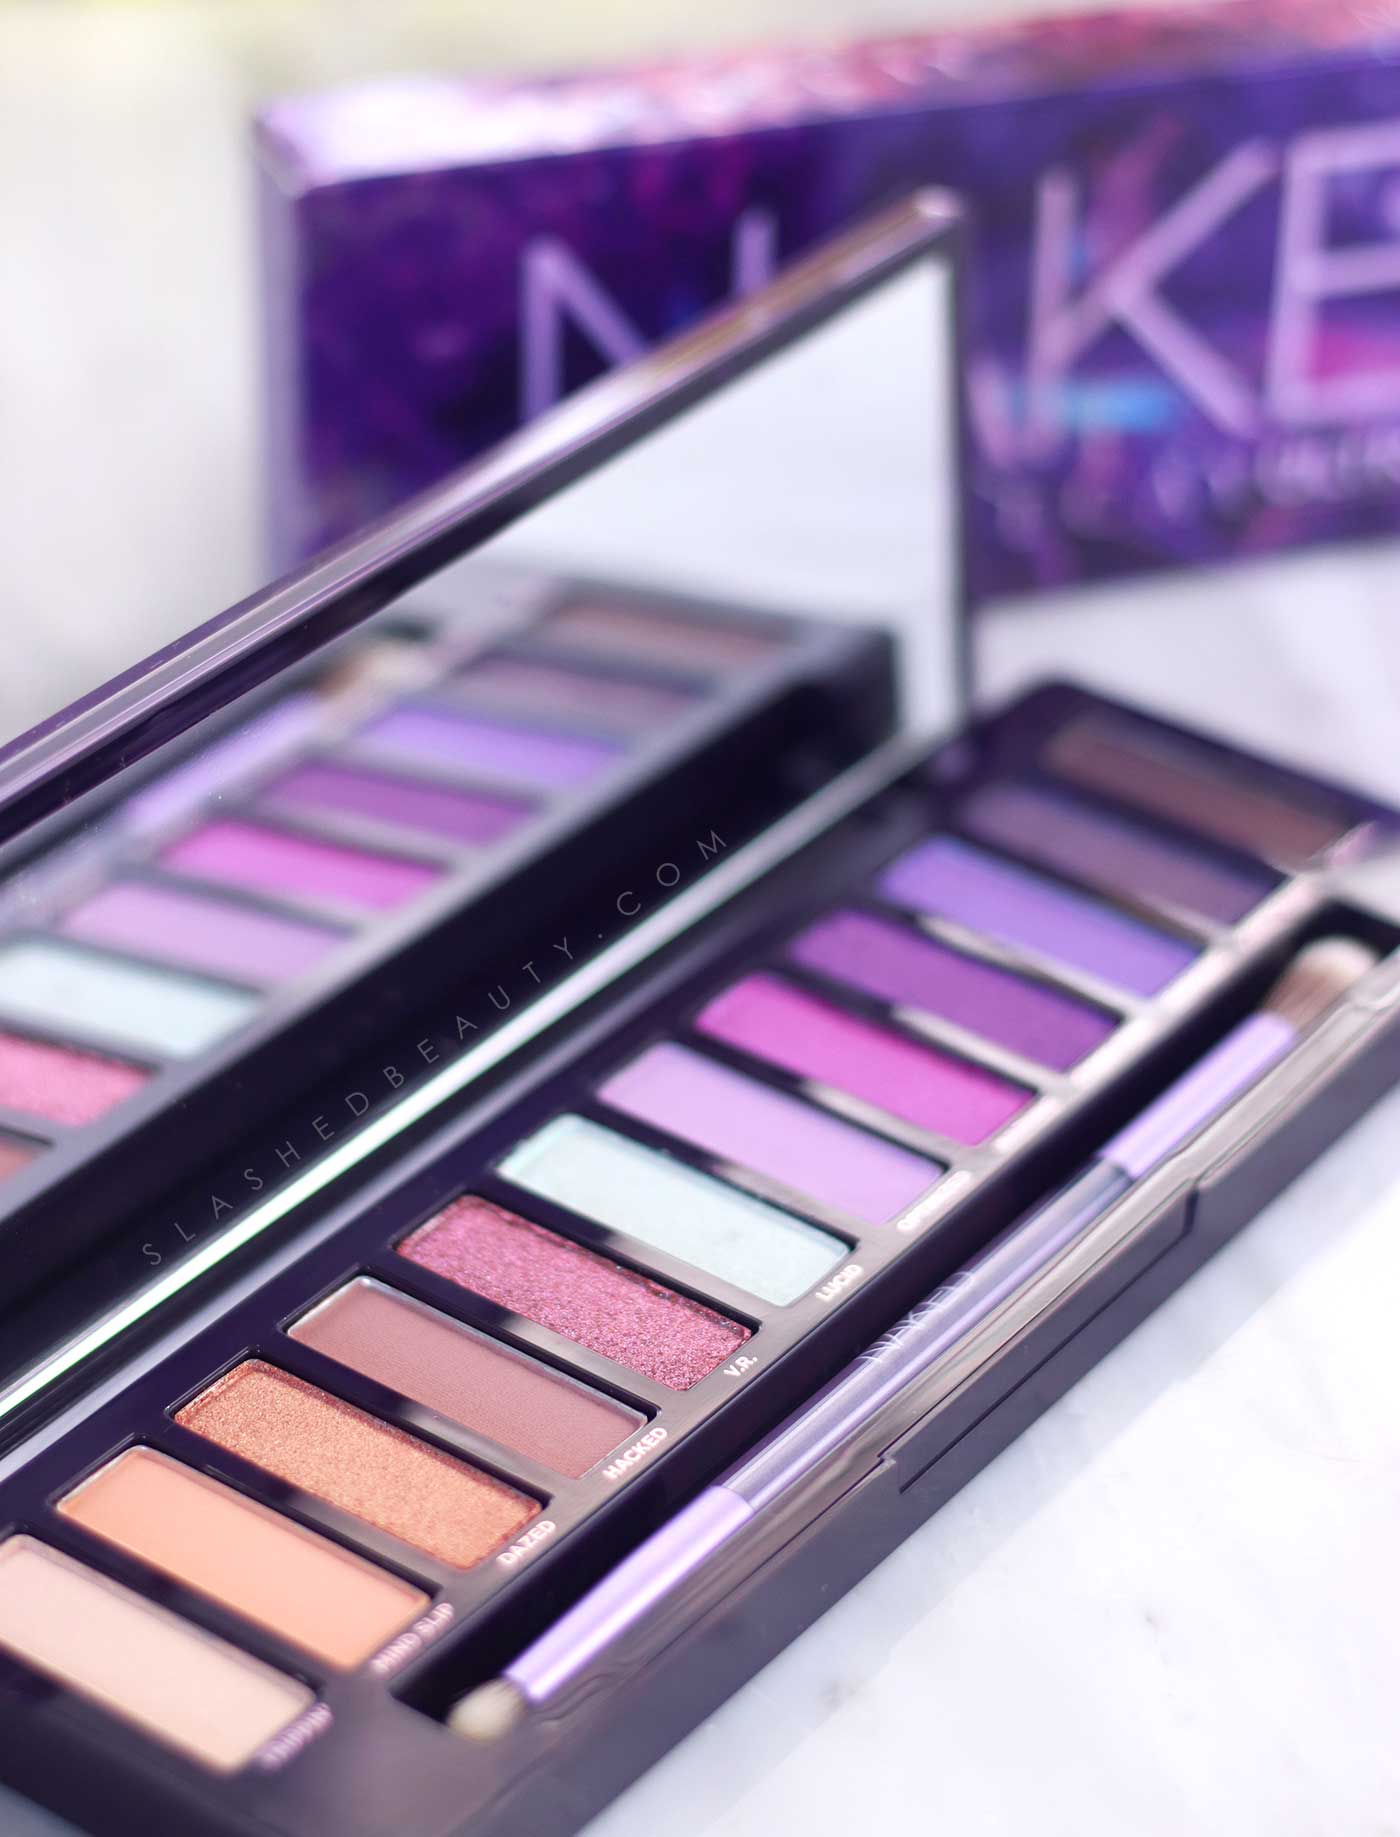 Urban Decay Naked Heat Review + Swatches - Hairspray and 